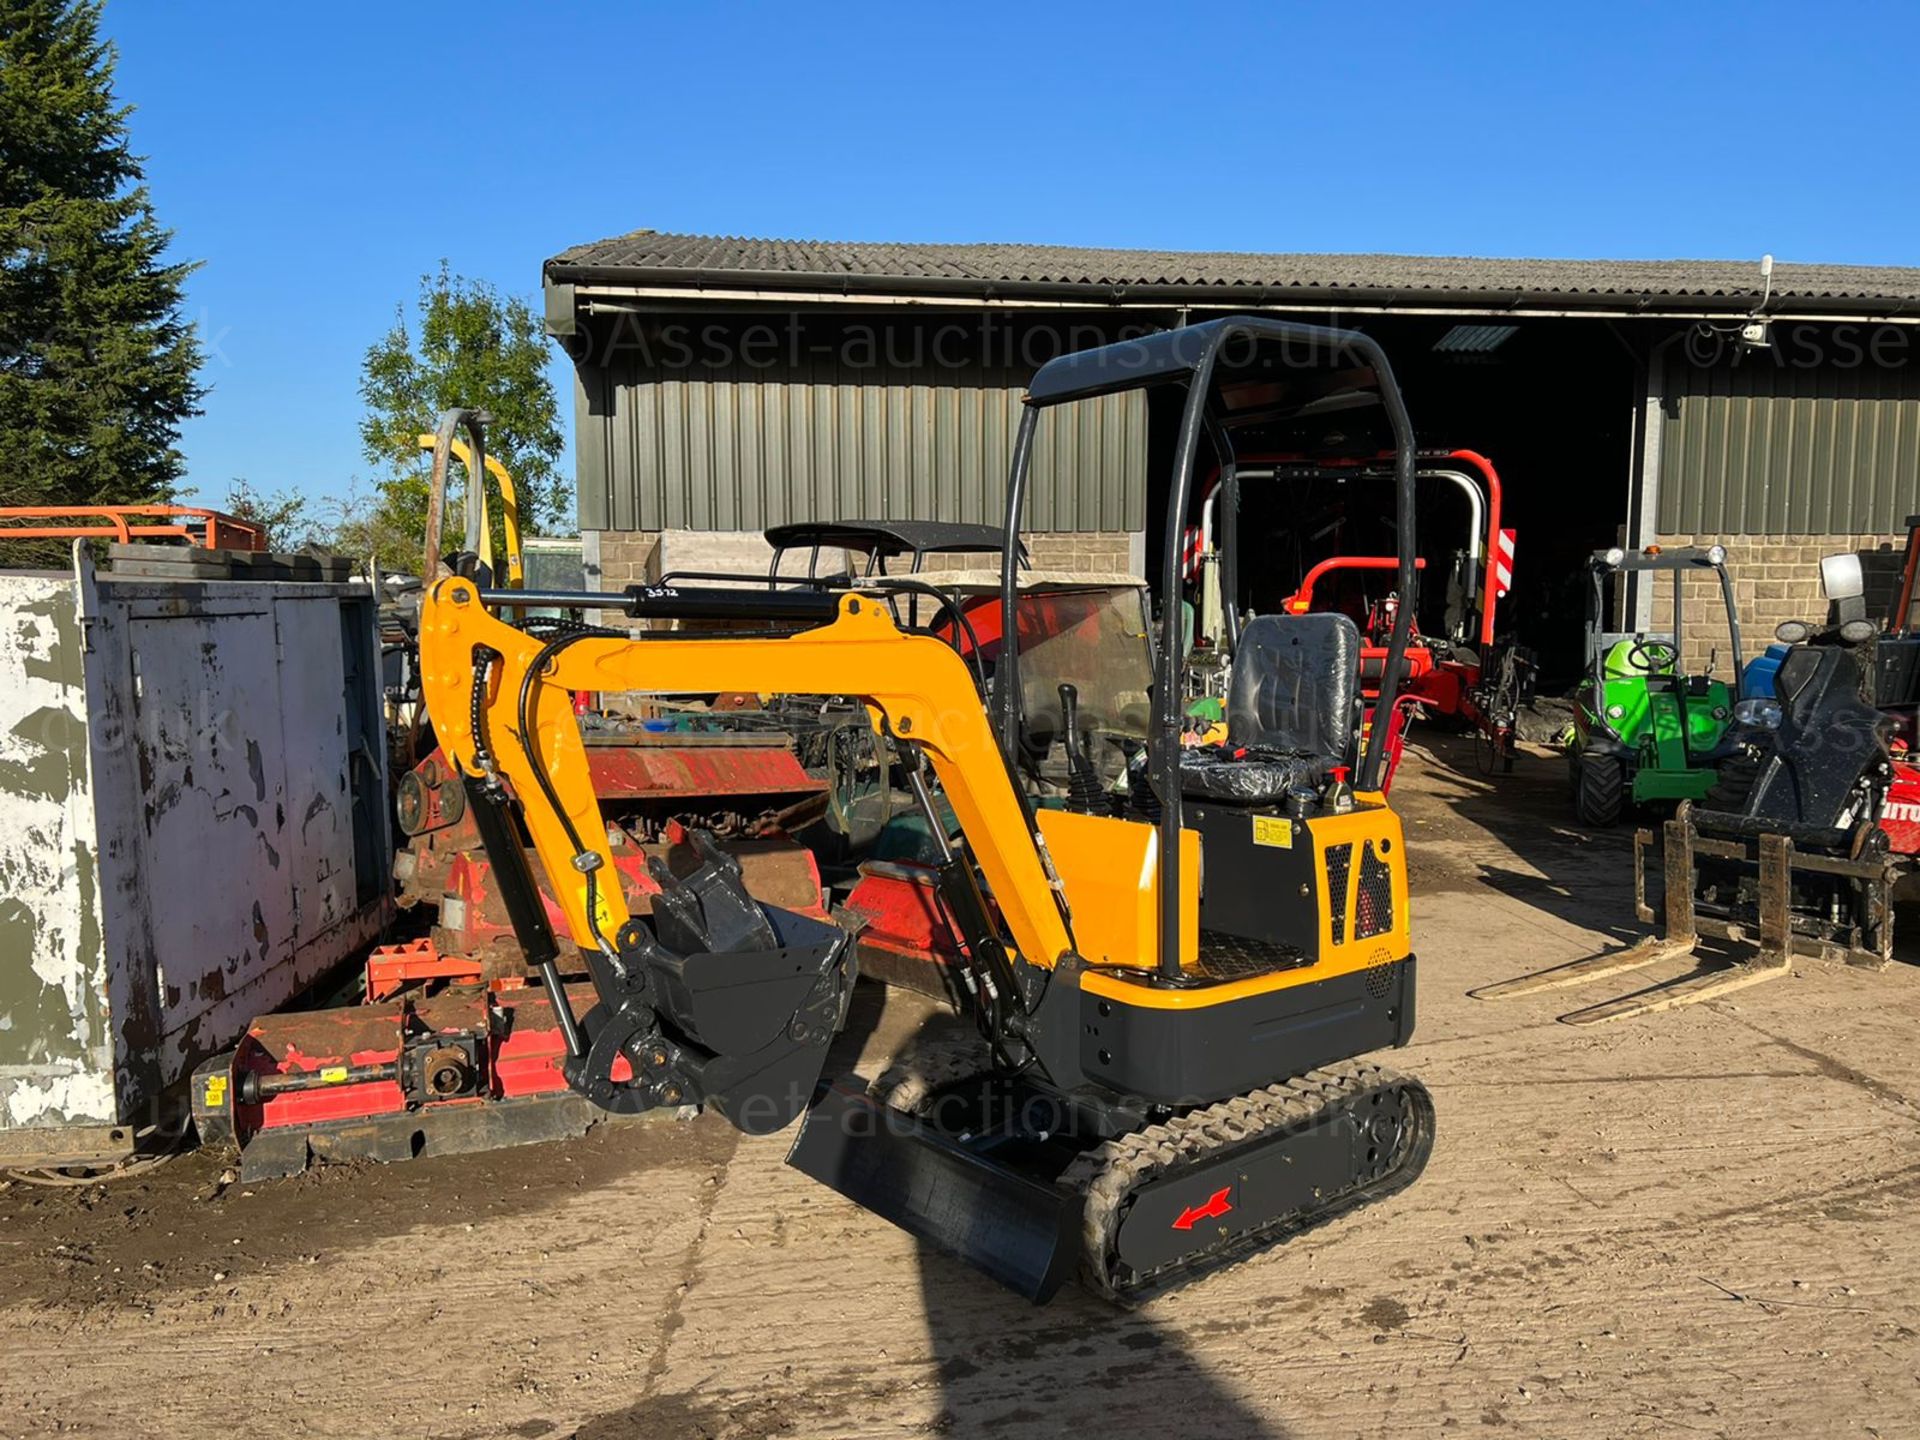 NEW AND UNUSED LM10 YELLOW AND BLACK 1 TON MINI DIGGER, RUNS DRIVES AND DIGS, 3 BUCKETS *PLUS VAT*